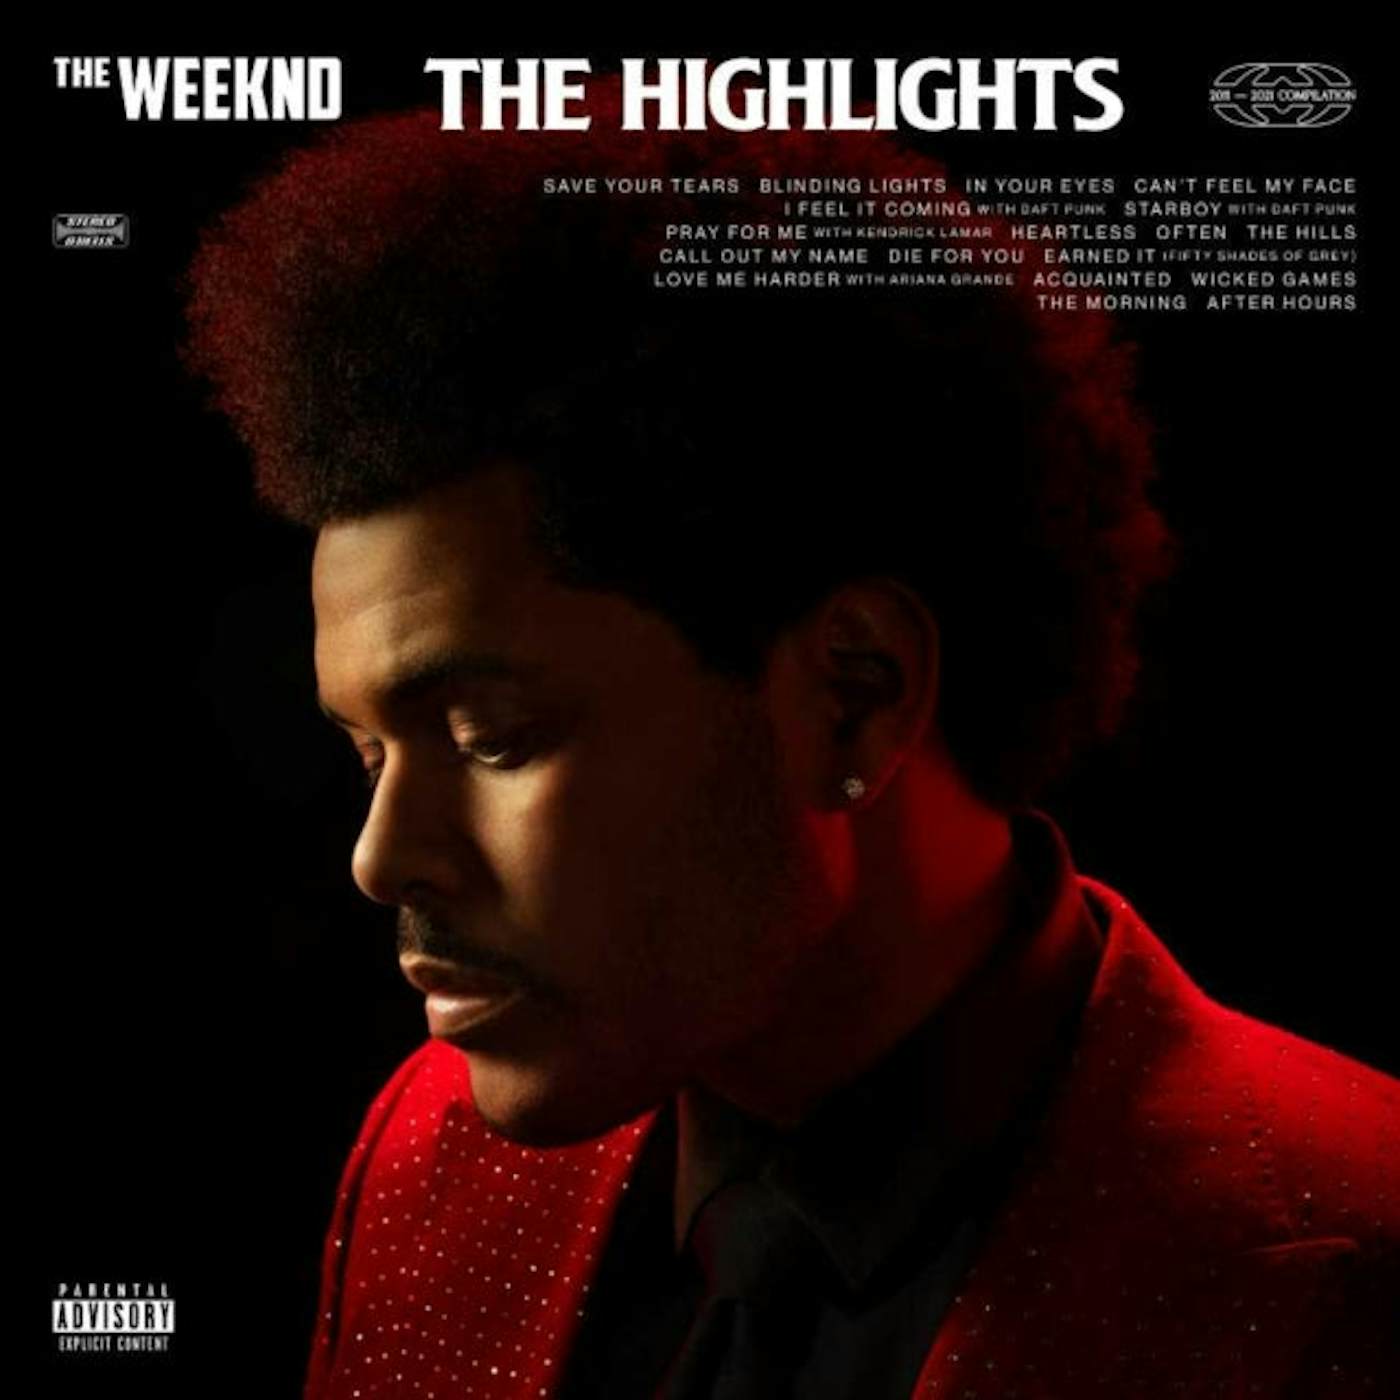 The Weeknd CD - The Highlights